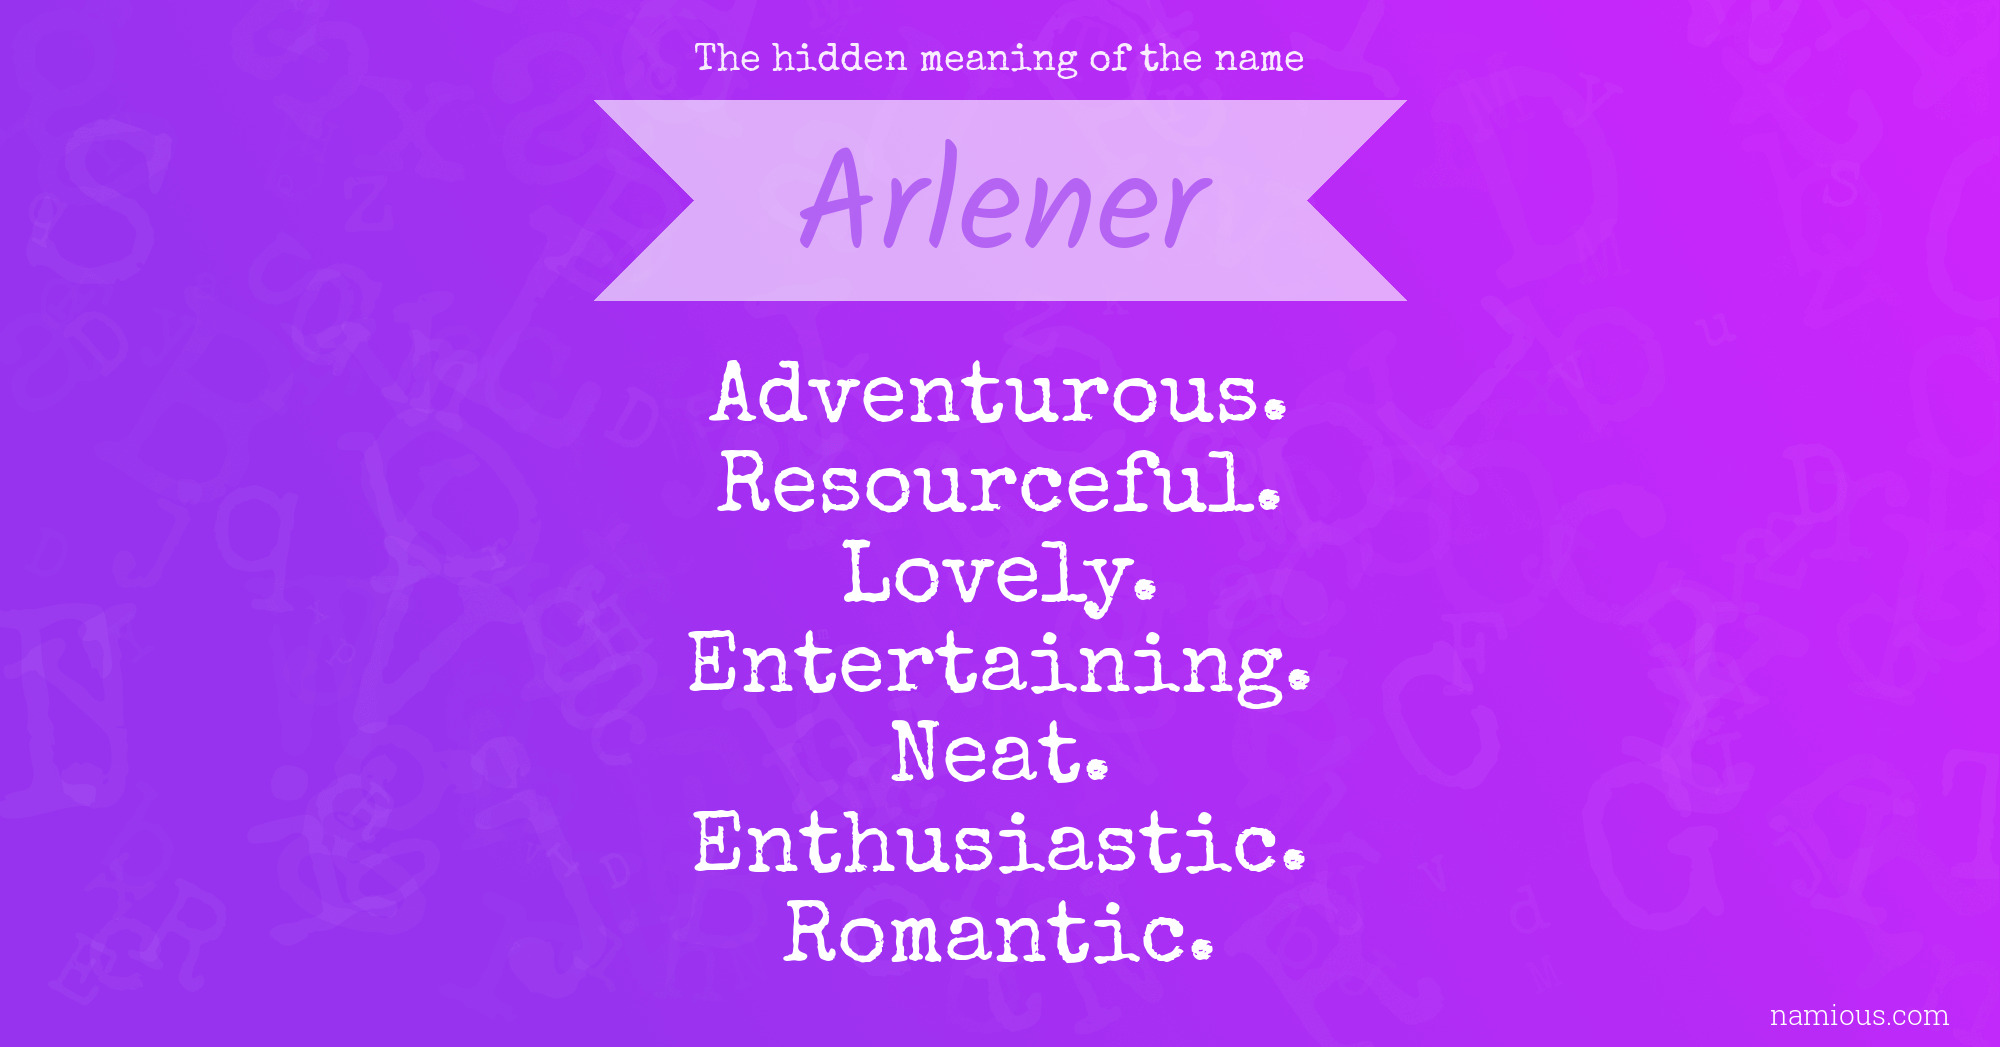 What is the meaning of arlene